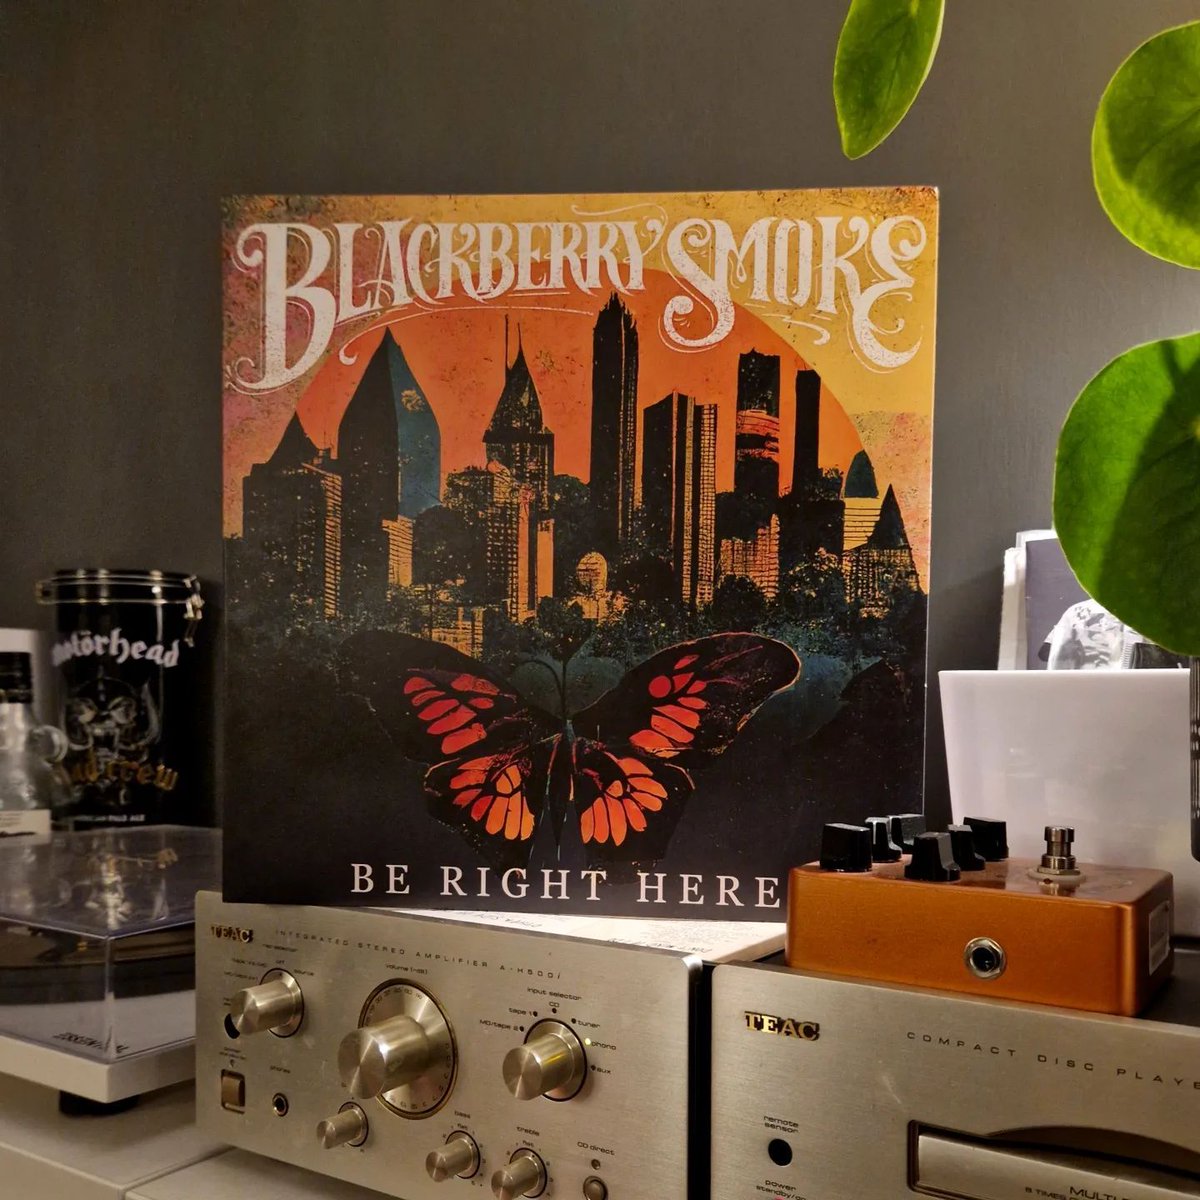 Blackberry Smoke's 'Be Right Here' on Indie Exclusive Gold Vinyl because some treasures just sound better in gold. 🎶✨ 

📸 ig: sy_vinyl

#collectionvinyl #lovevinyl #vinylmusic #vinylcollectors #vinyllife #recordcollectionpost #recordlover #igvinyl #vinylrecords #instarecords